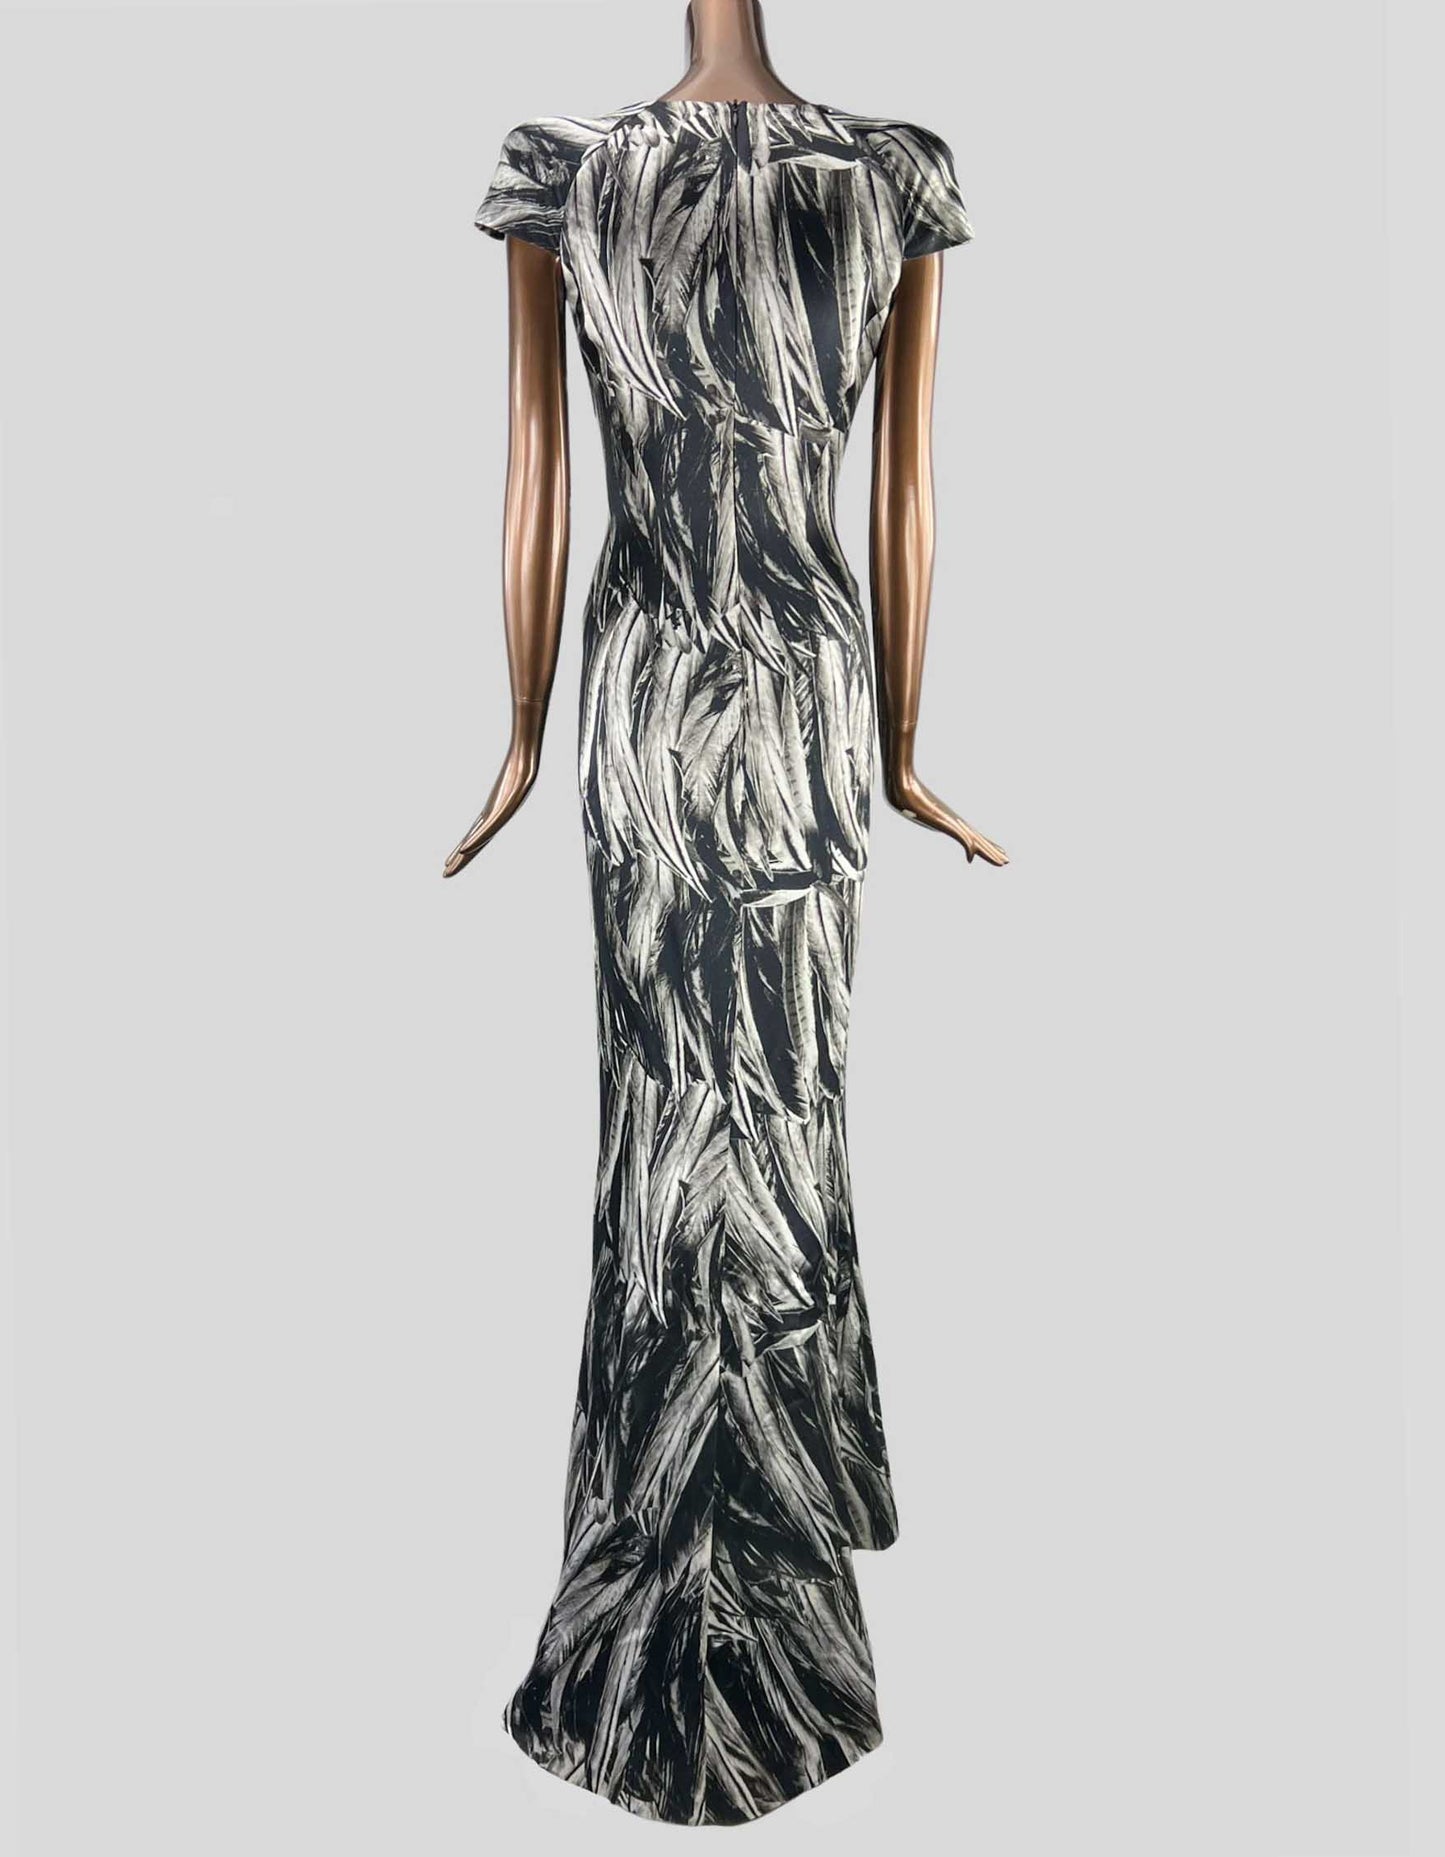 Alexander McQueen Feather Gown Spring 2008 la Dame Blue collection Tribute to Issabella Blow - 40 IT | 4 US